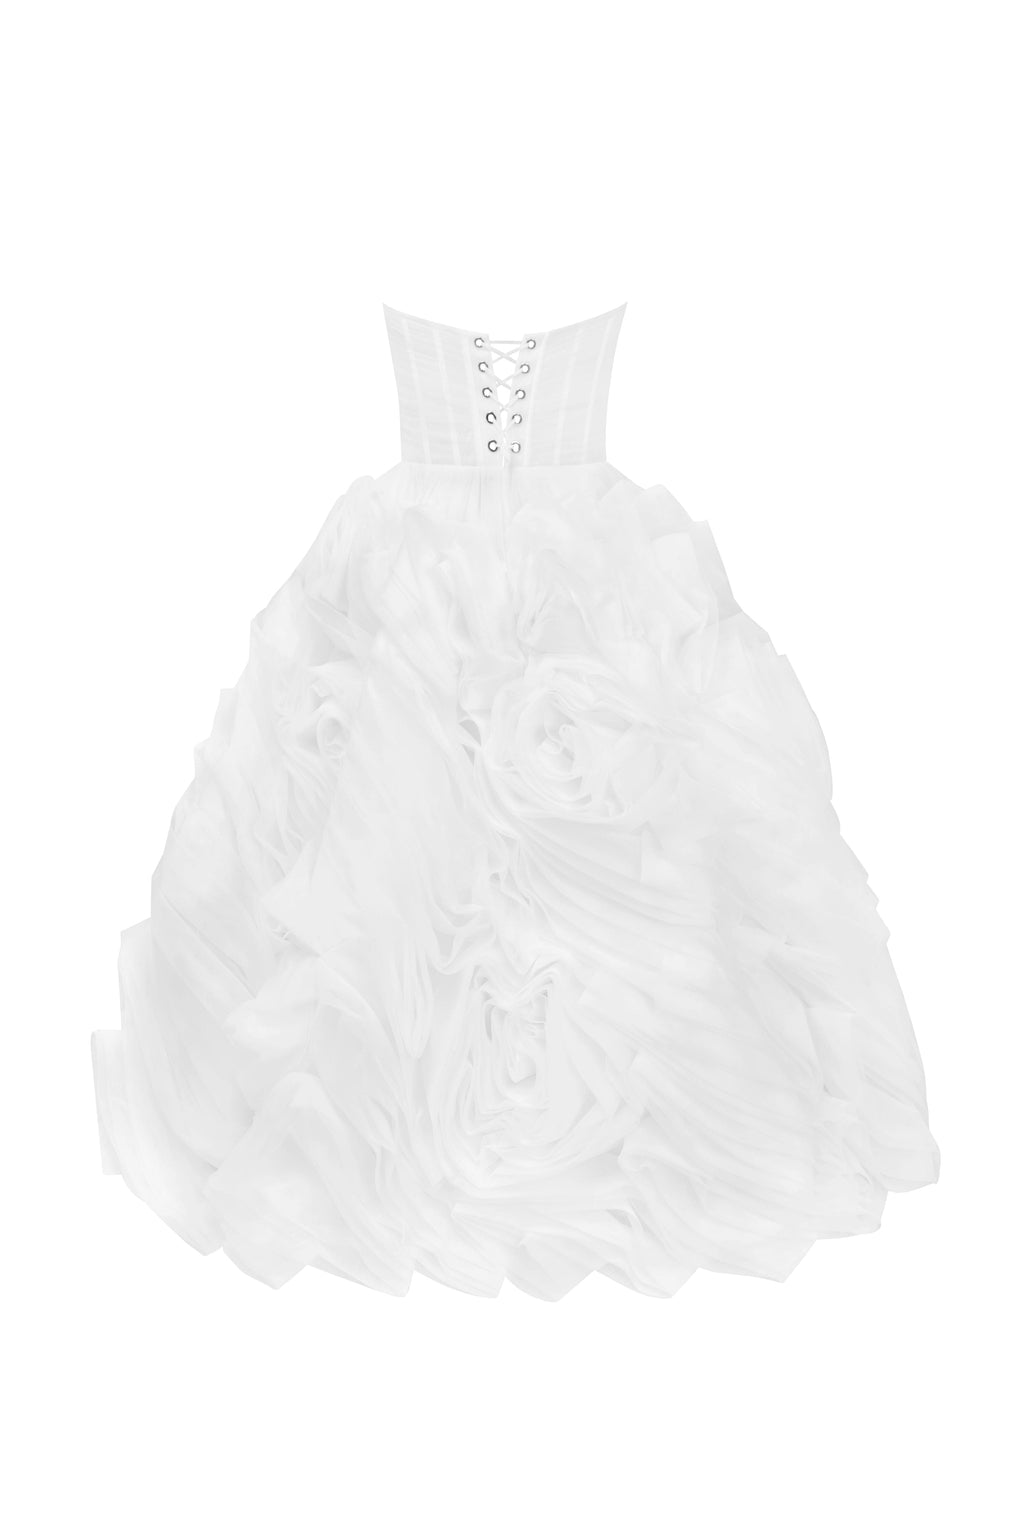 Dramatically flowered tulle dress in white